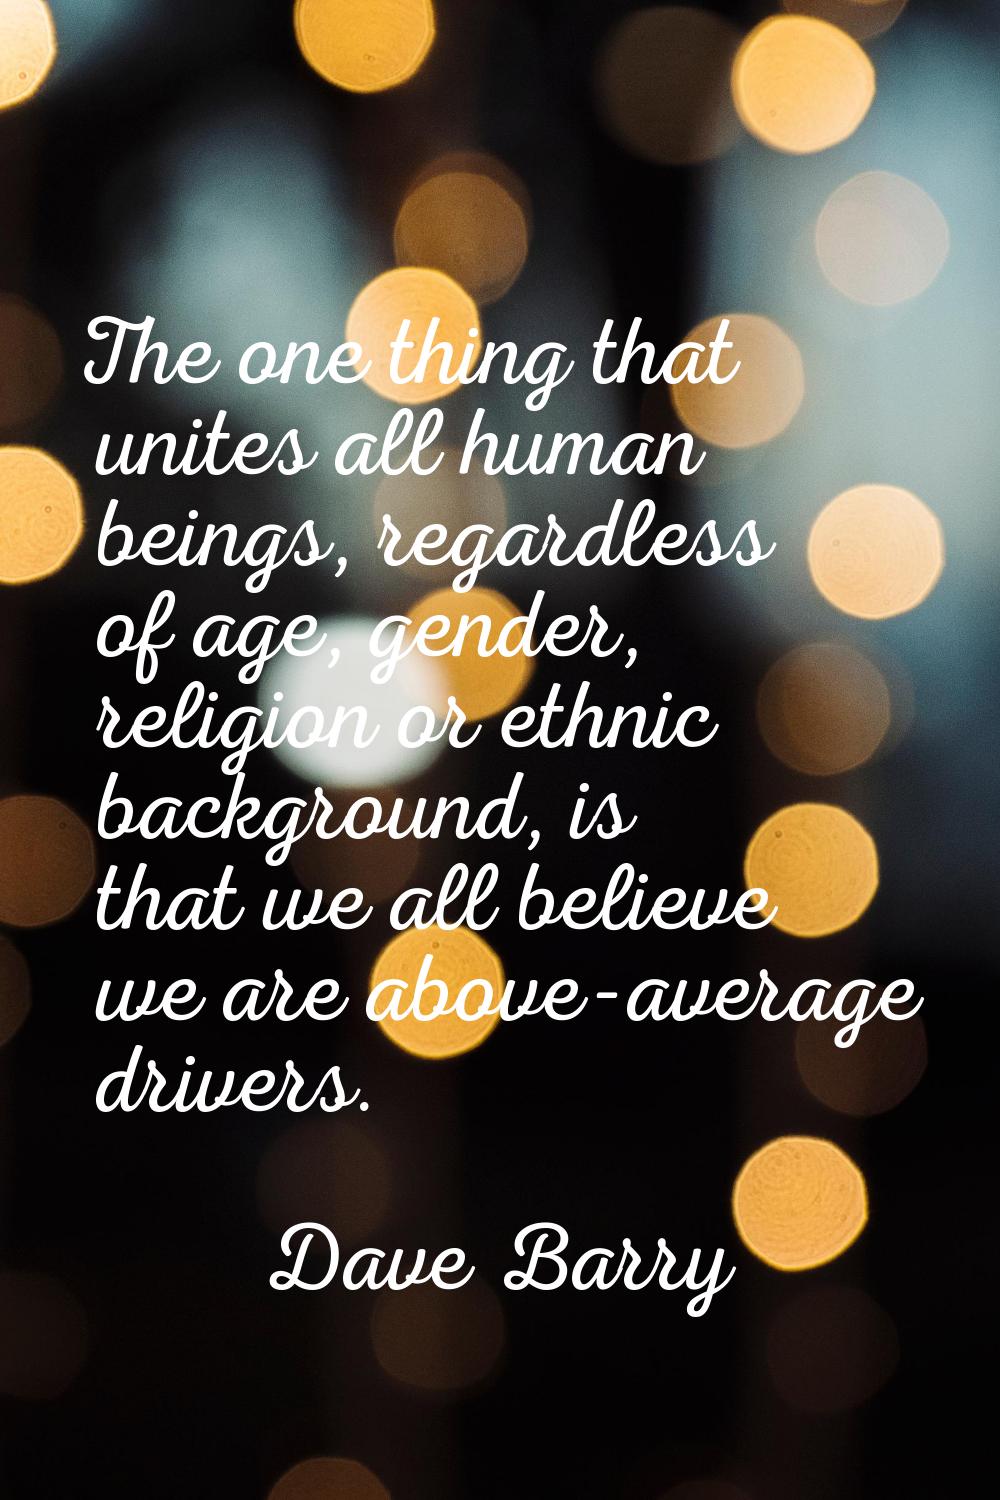 The one thing that unites all human beings, regardless of age, gender, religion or ethnic backgroun